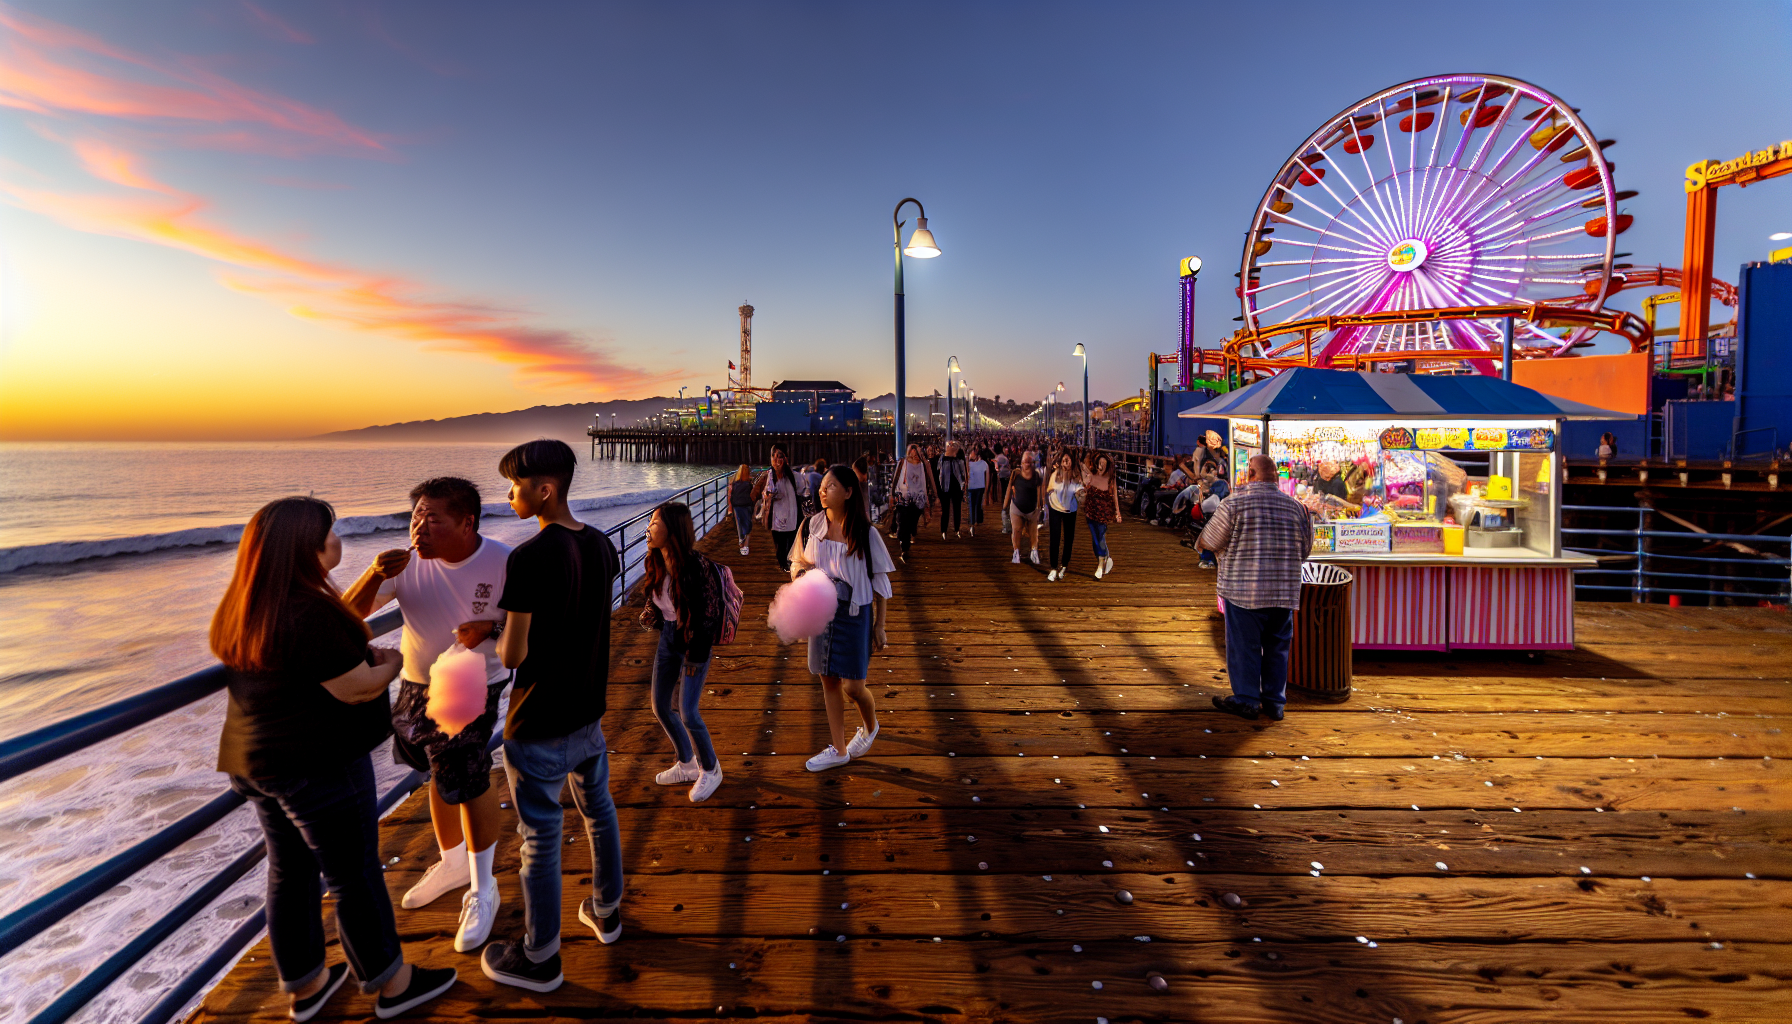 Vibrant atmosphere and carnival thrills at Santa Monica Pier